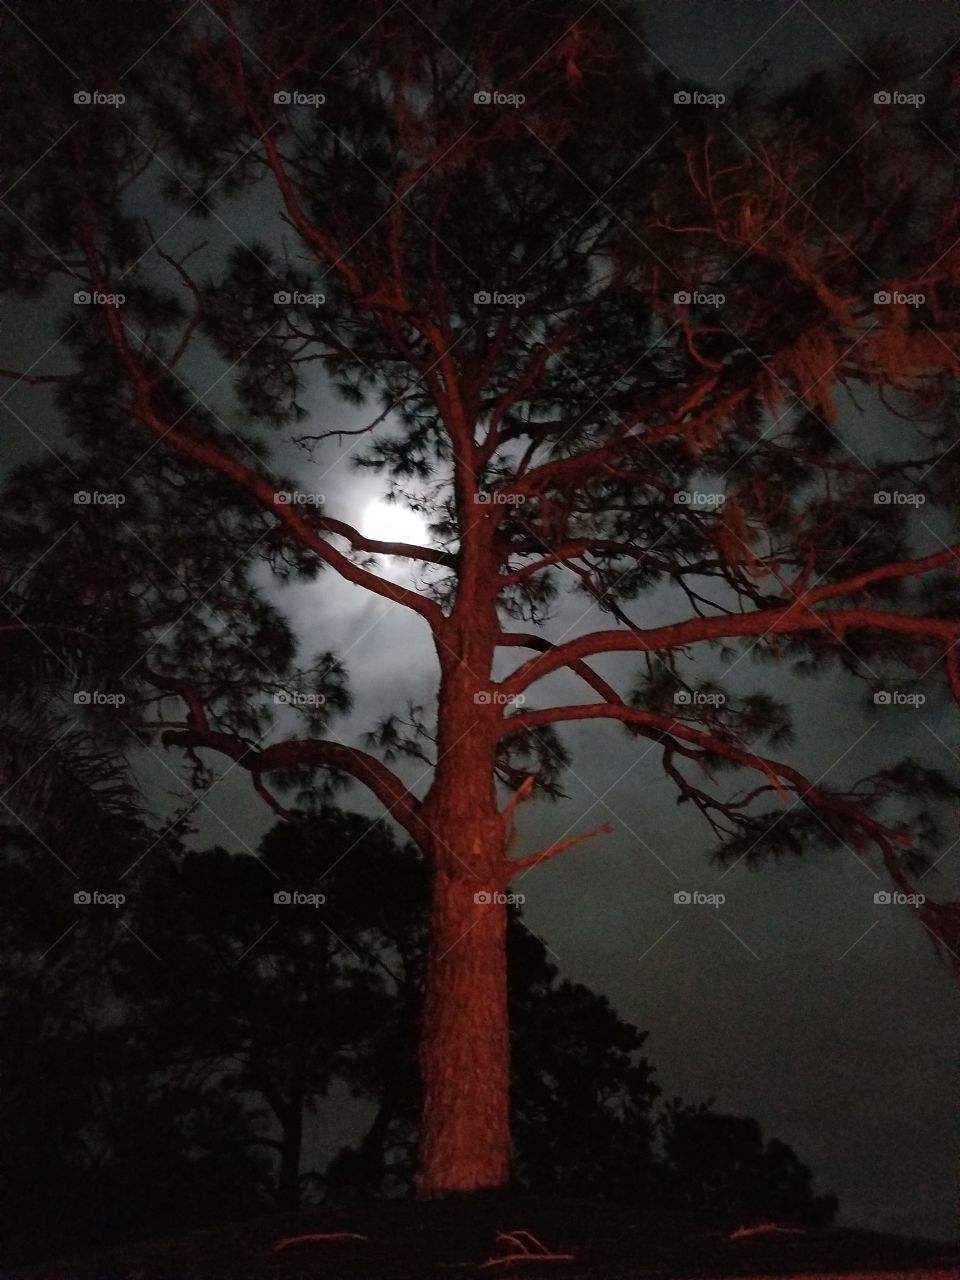 Moonlight in the sky through a Tree in the dark of the night.